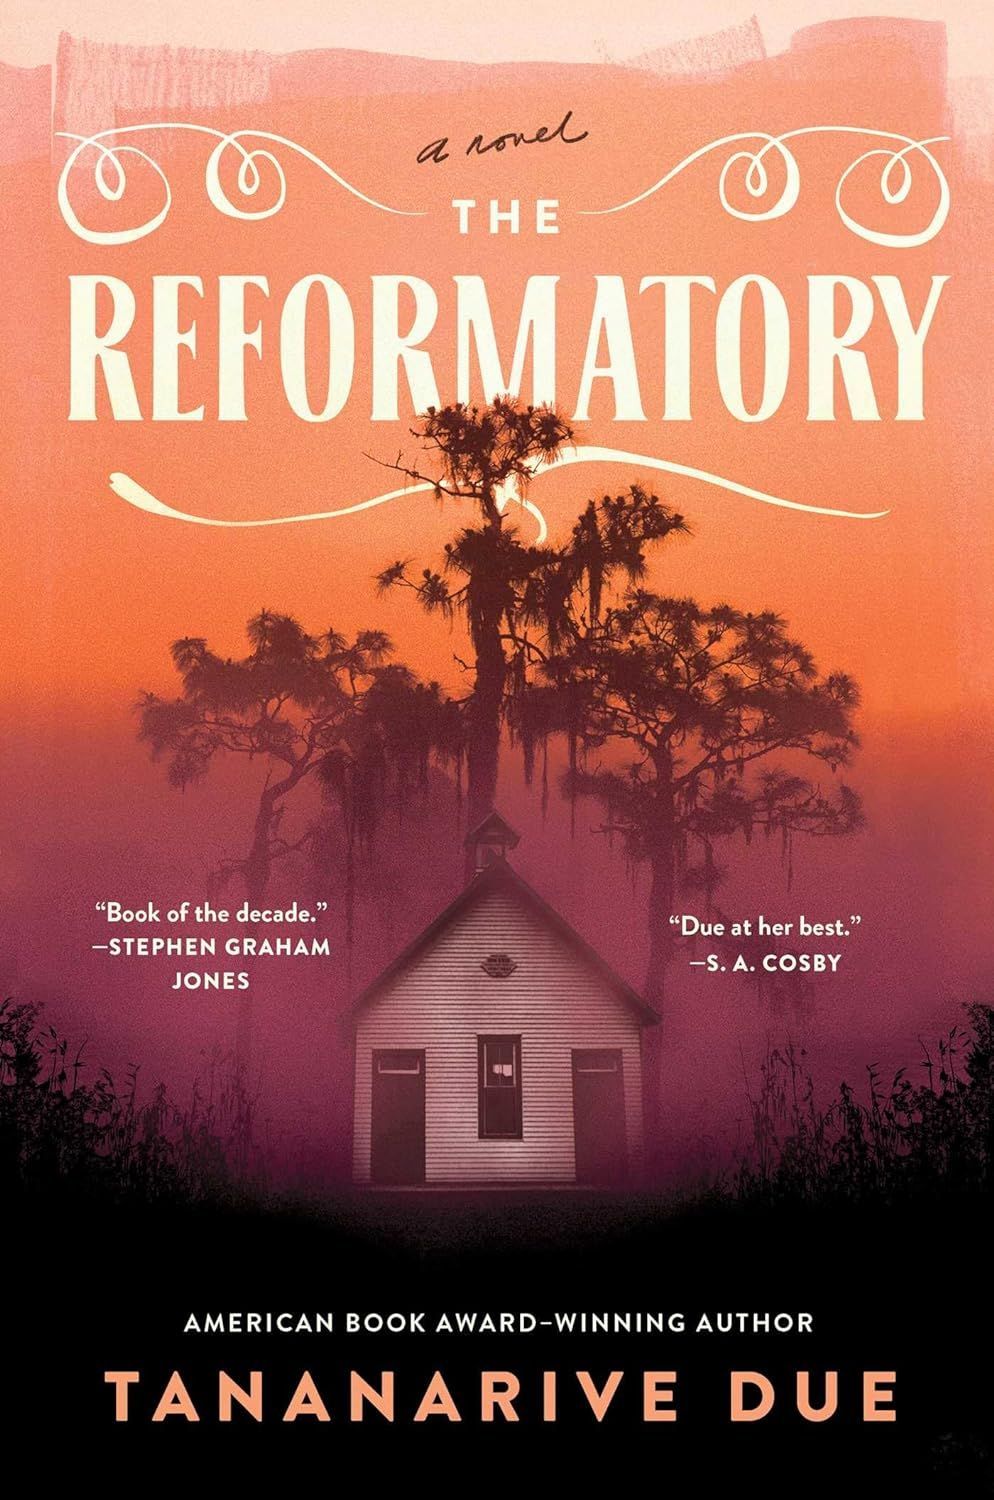 The Ghost of America’s Past Haunts Its Present: On Tananarive Due’s “The Reformatory”